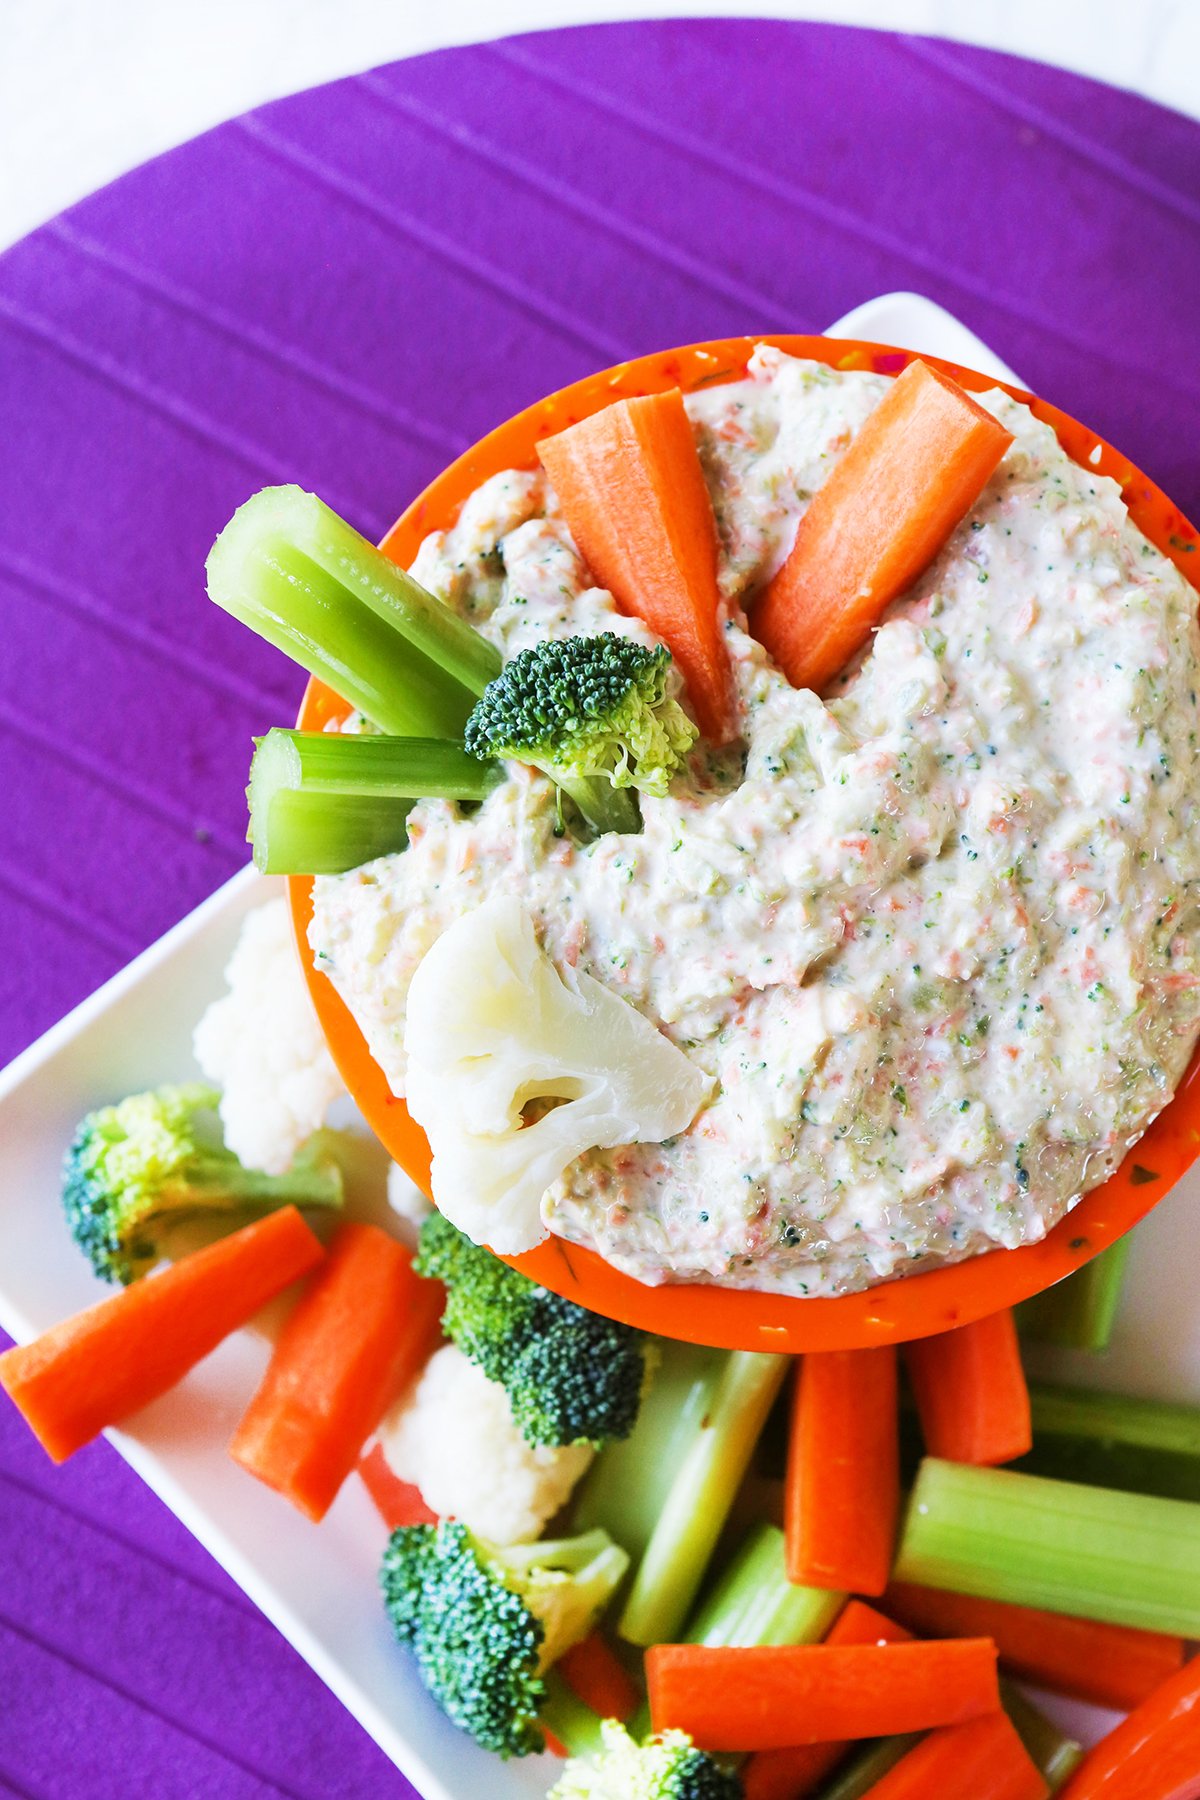 Bowl of vegetable dip loaded with carrots, celery and broccoli florets.